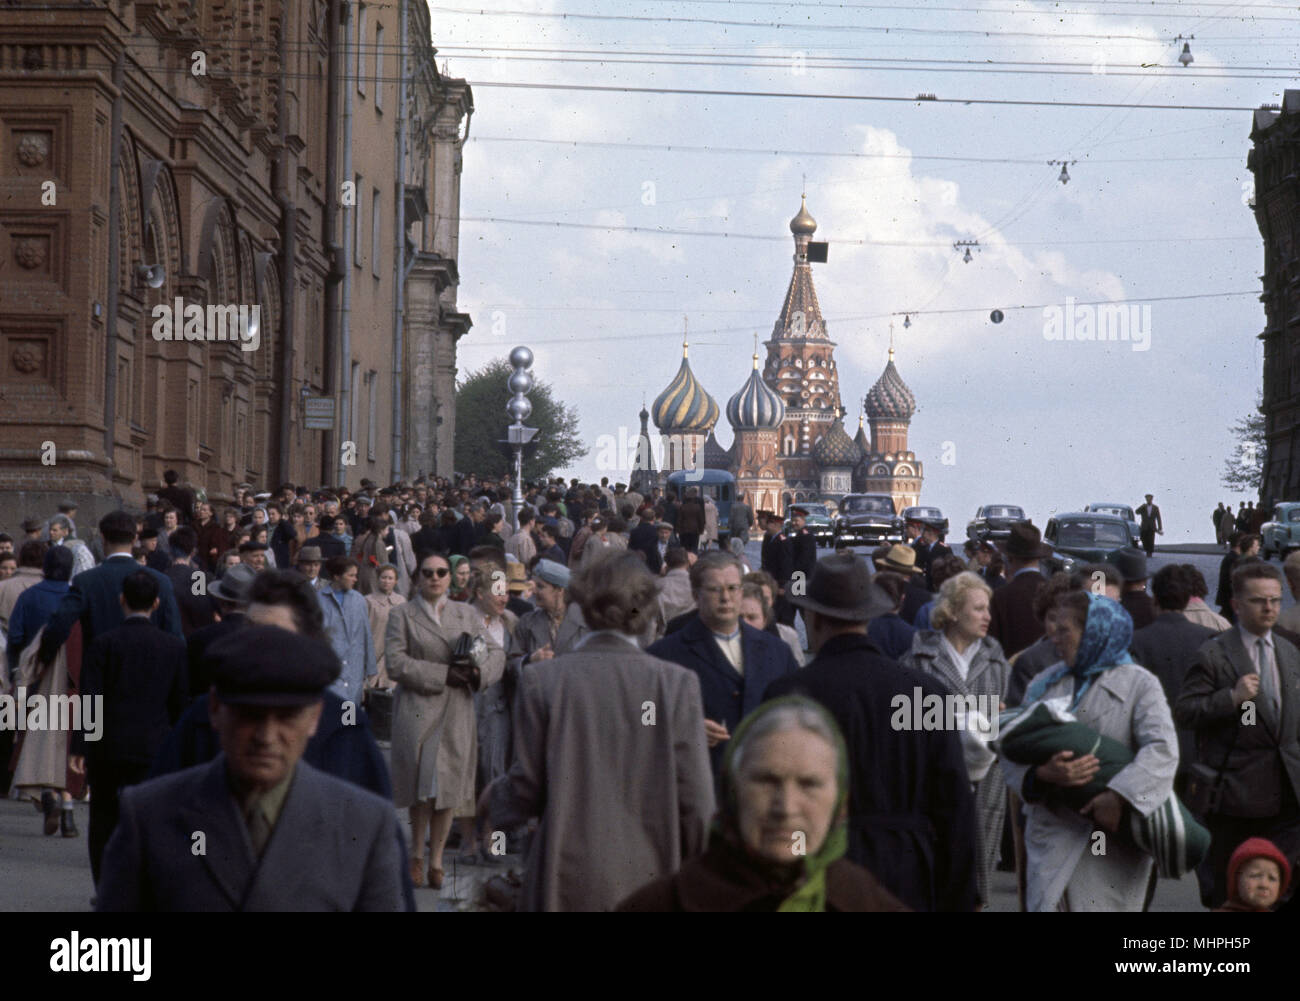 People in the street, Red Square, Moscow, USSR, with St Basil's Cathedral in the background.      Date: circa 1960s Stock Photo